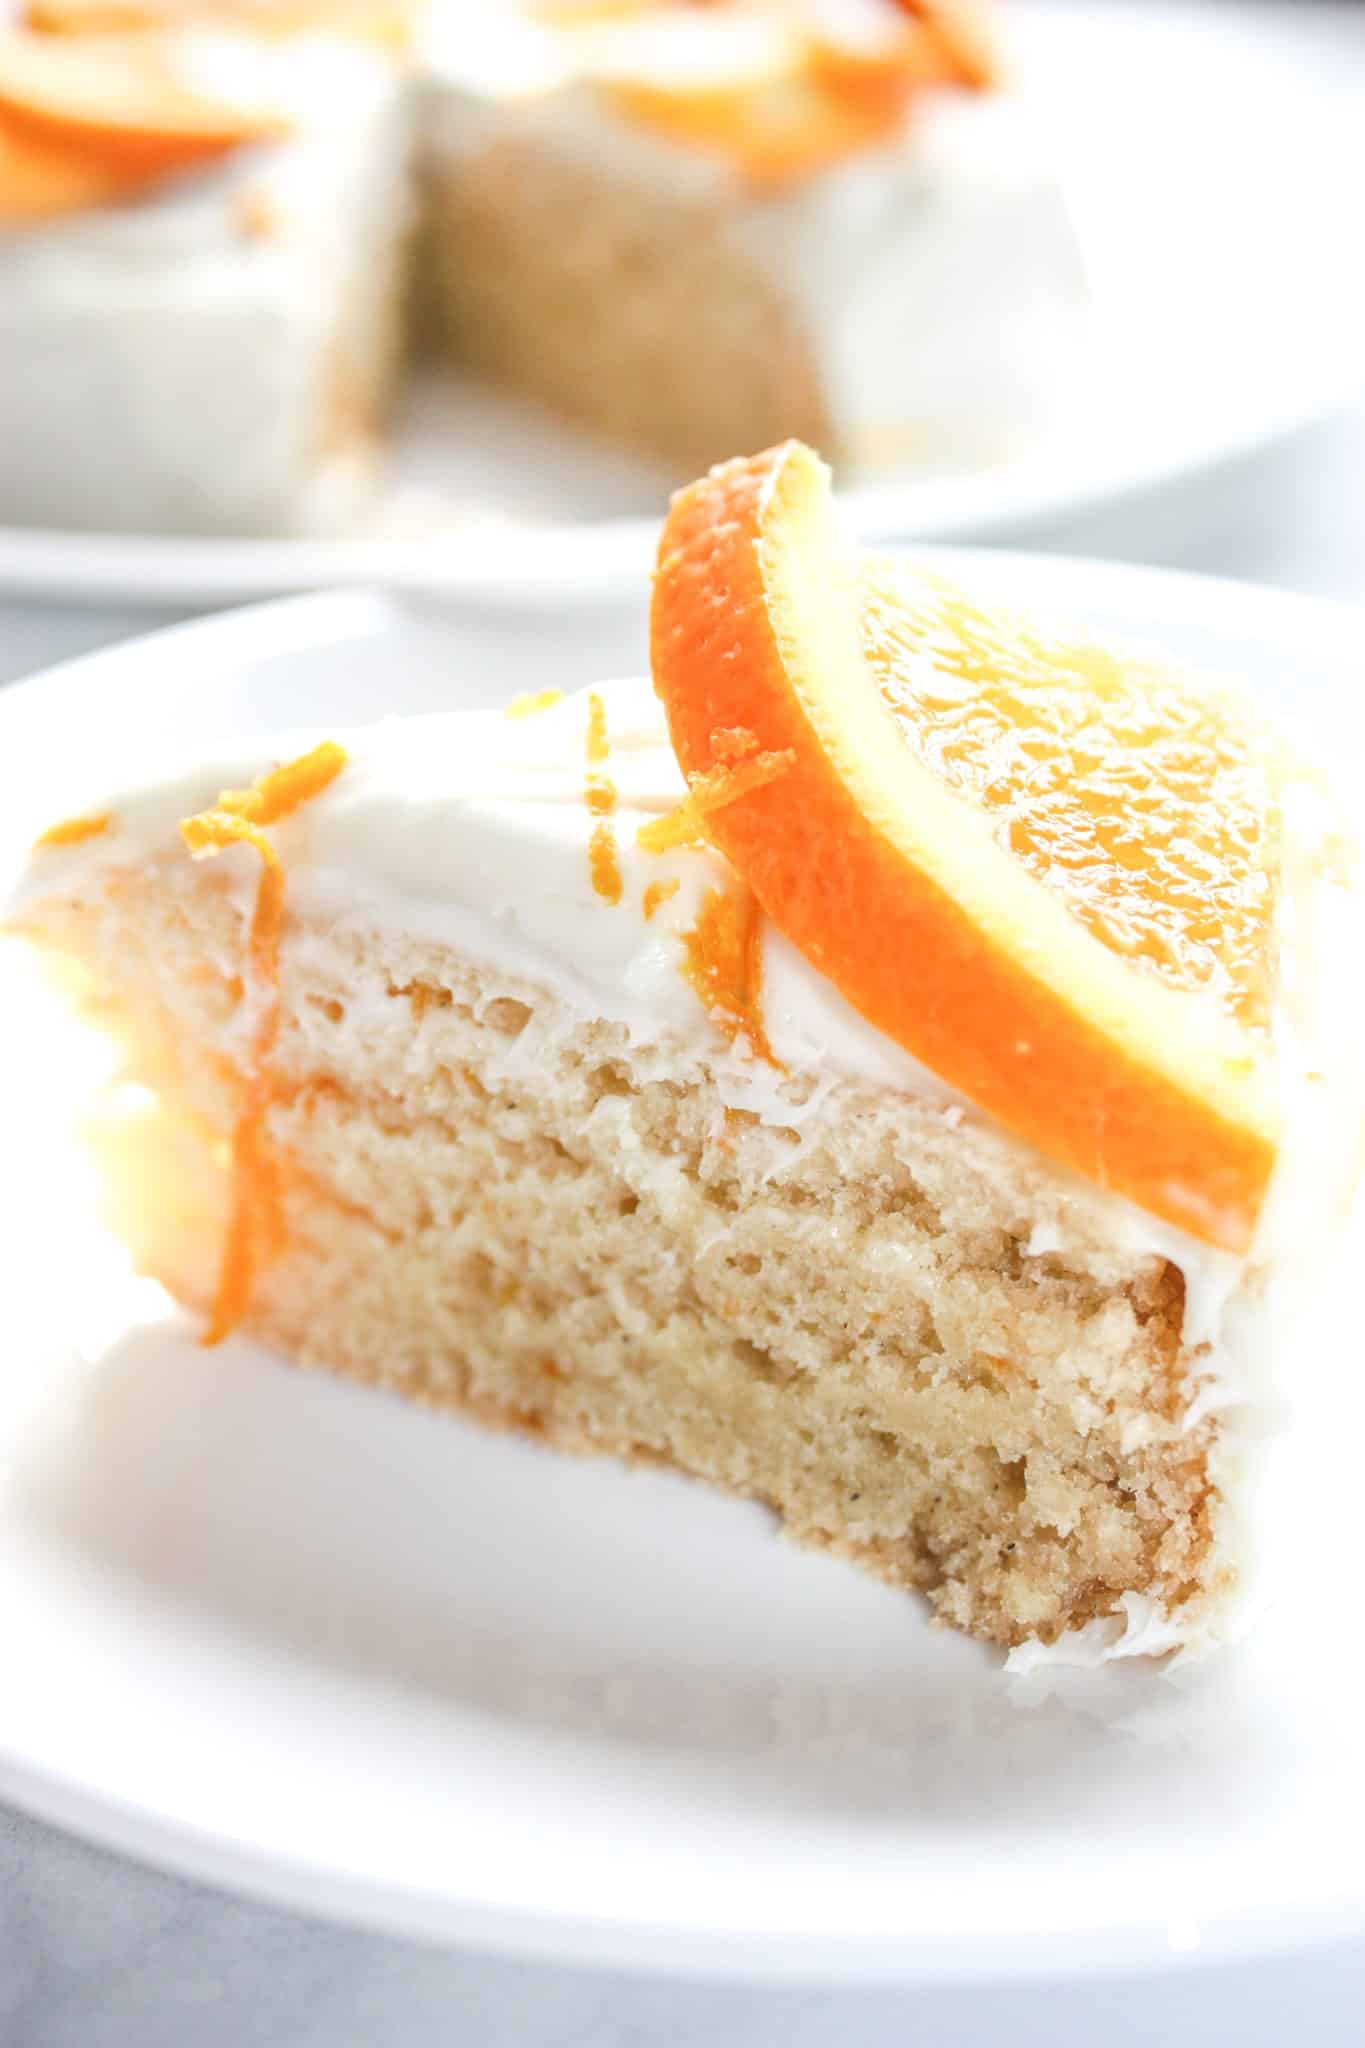 Spring and summer bring on cravings for all things citrus!  This Instant Pot Orange Cake is an easy pressure cooker recipe that complement any warm weather meal. This gluten free cake is moist and delicious!